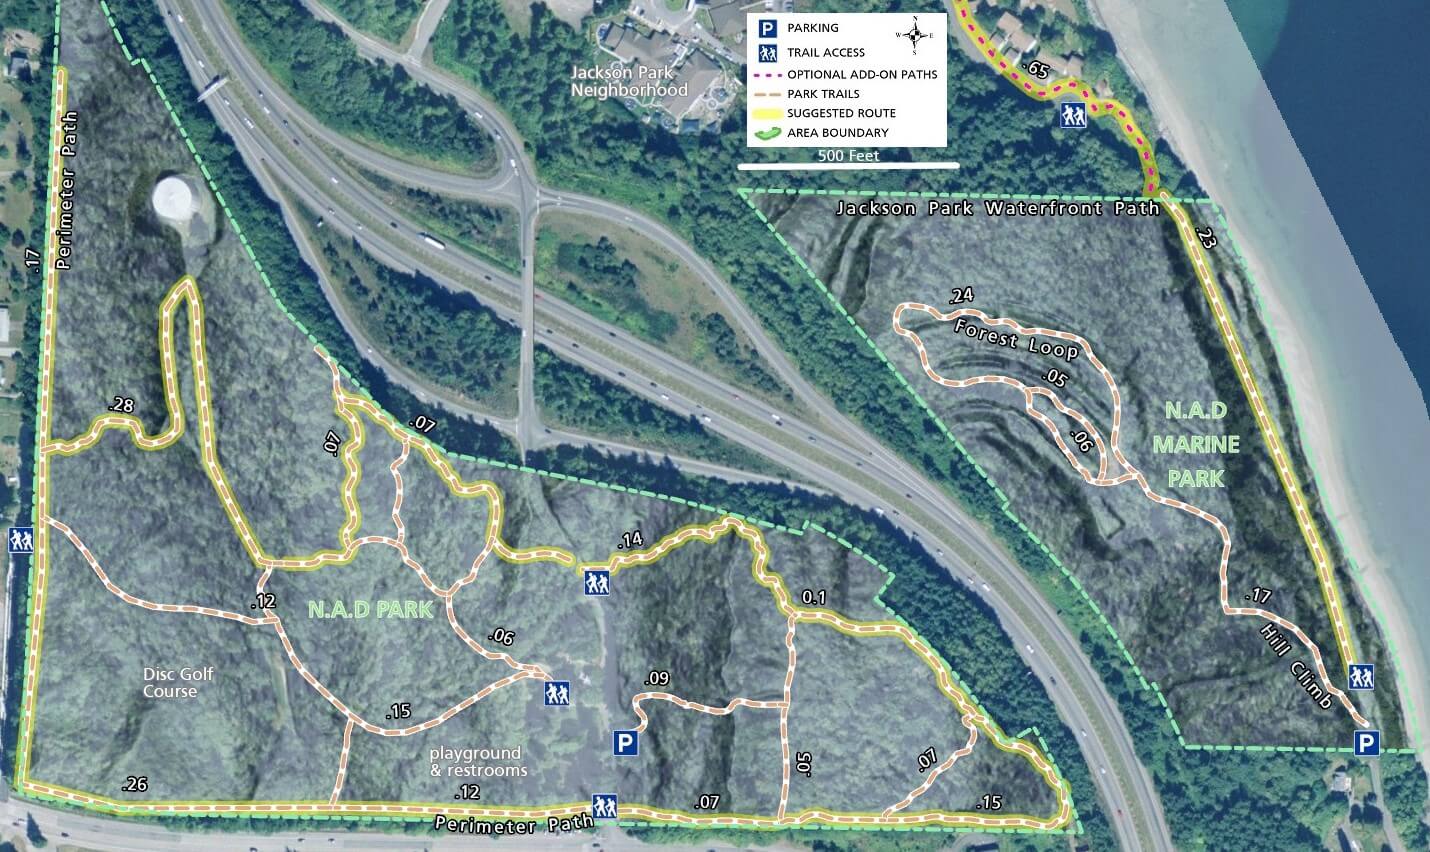 NAD Park Trail Map - Imagery